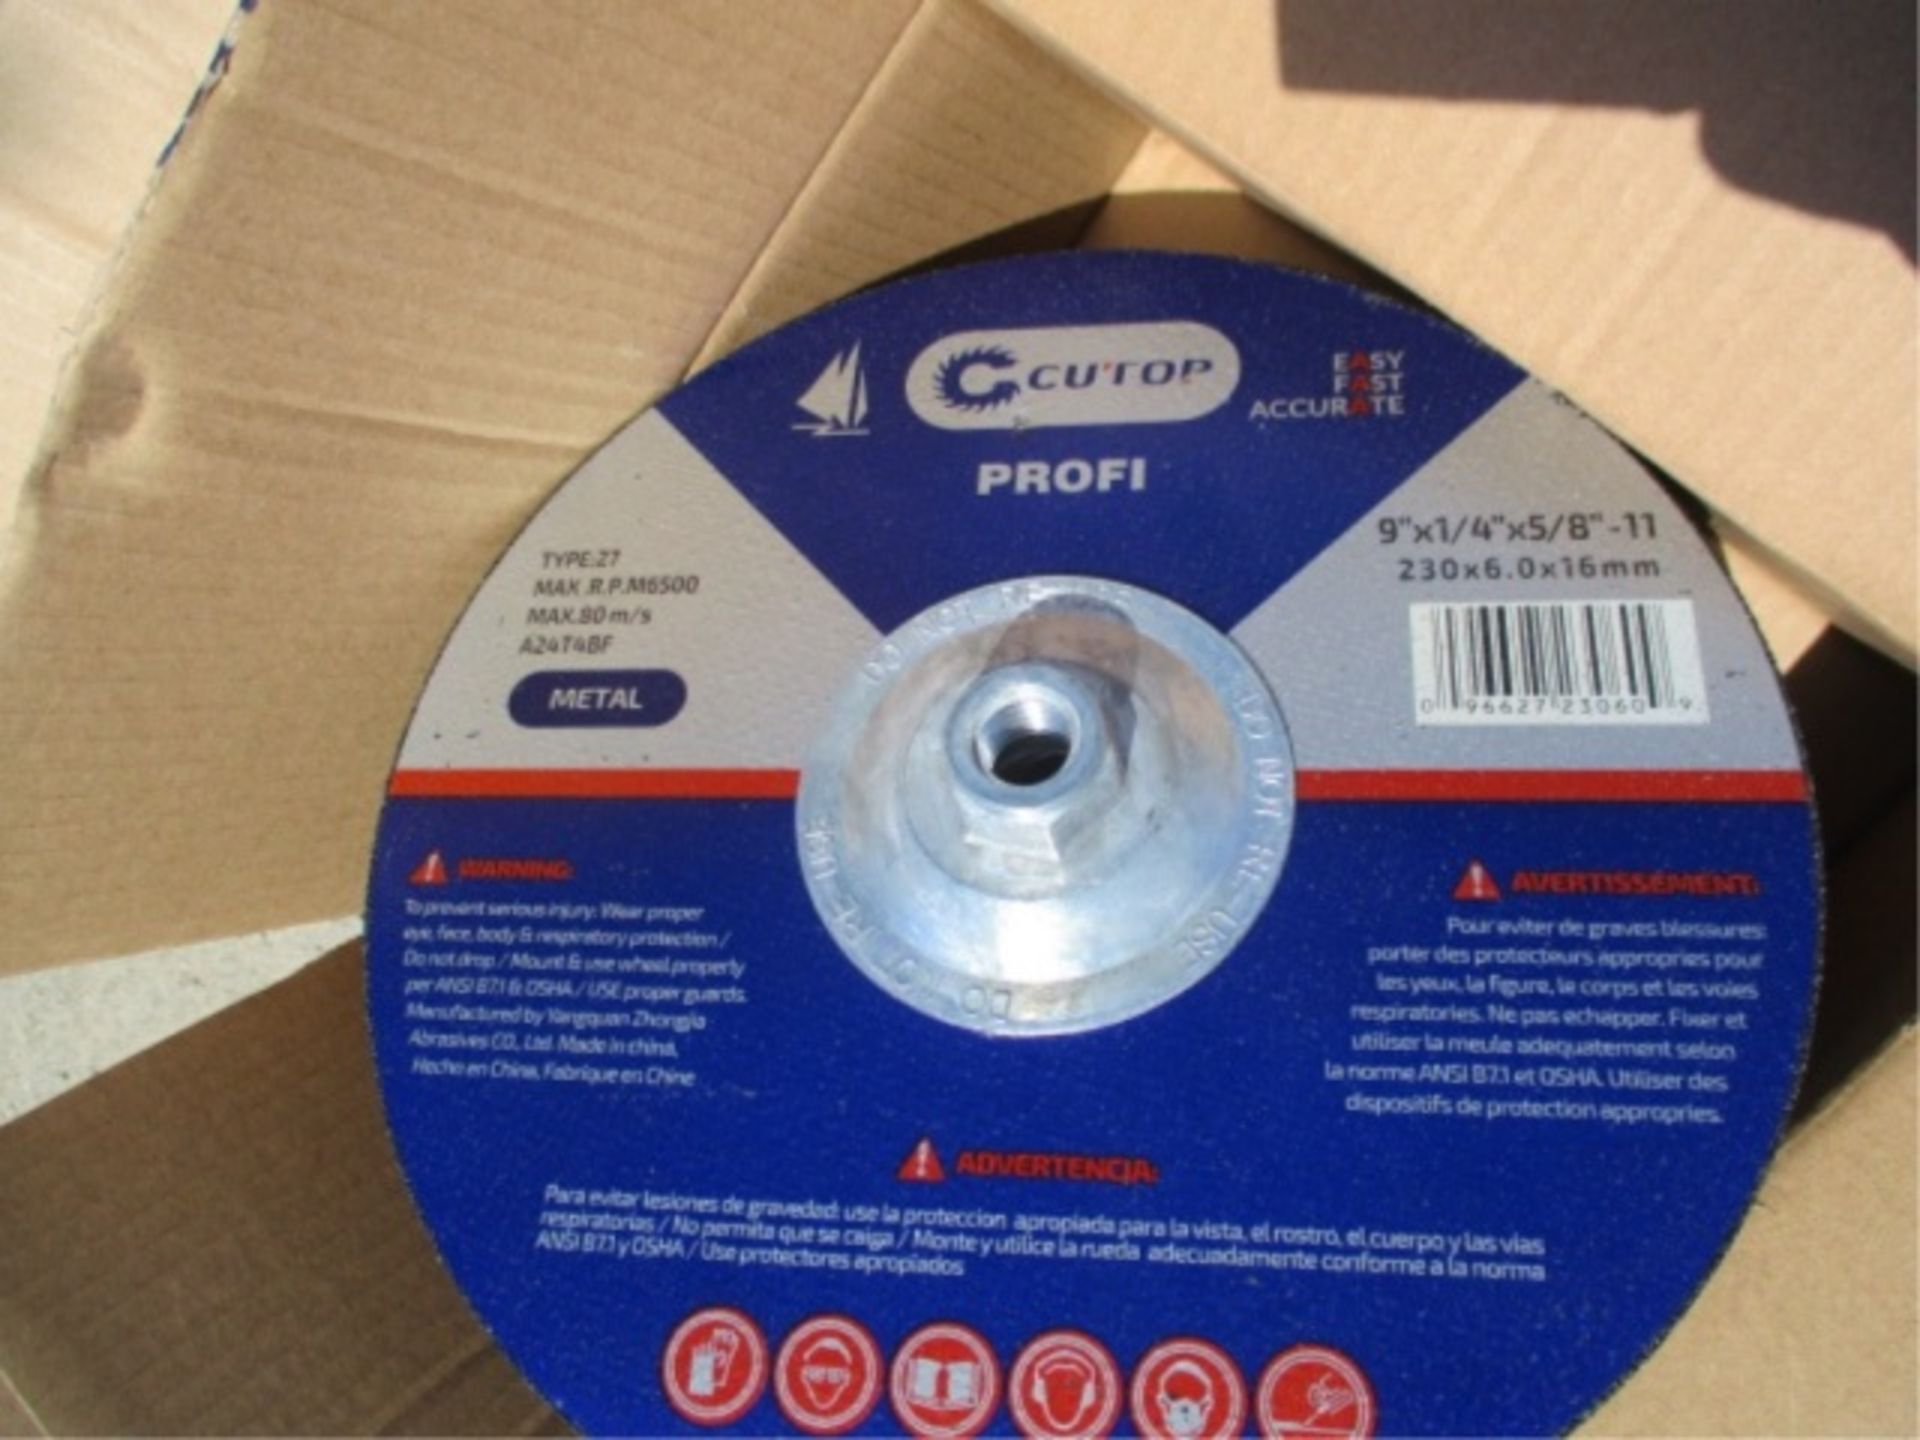 Lot Of Cuttop Metal Grinding Discs - Image 12 of 12